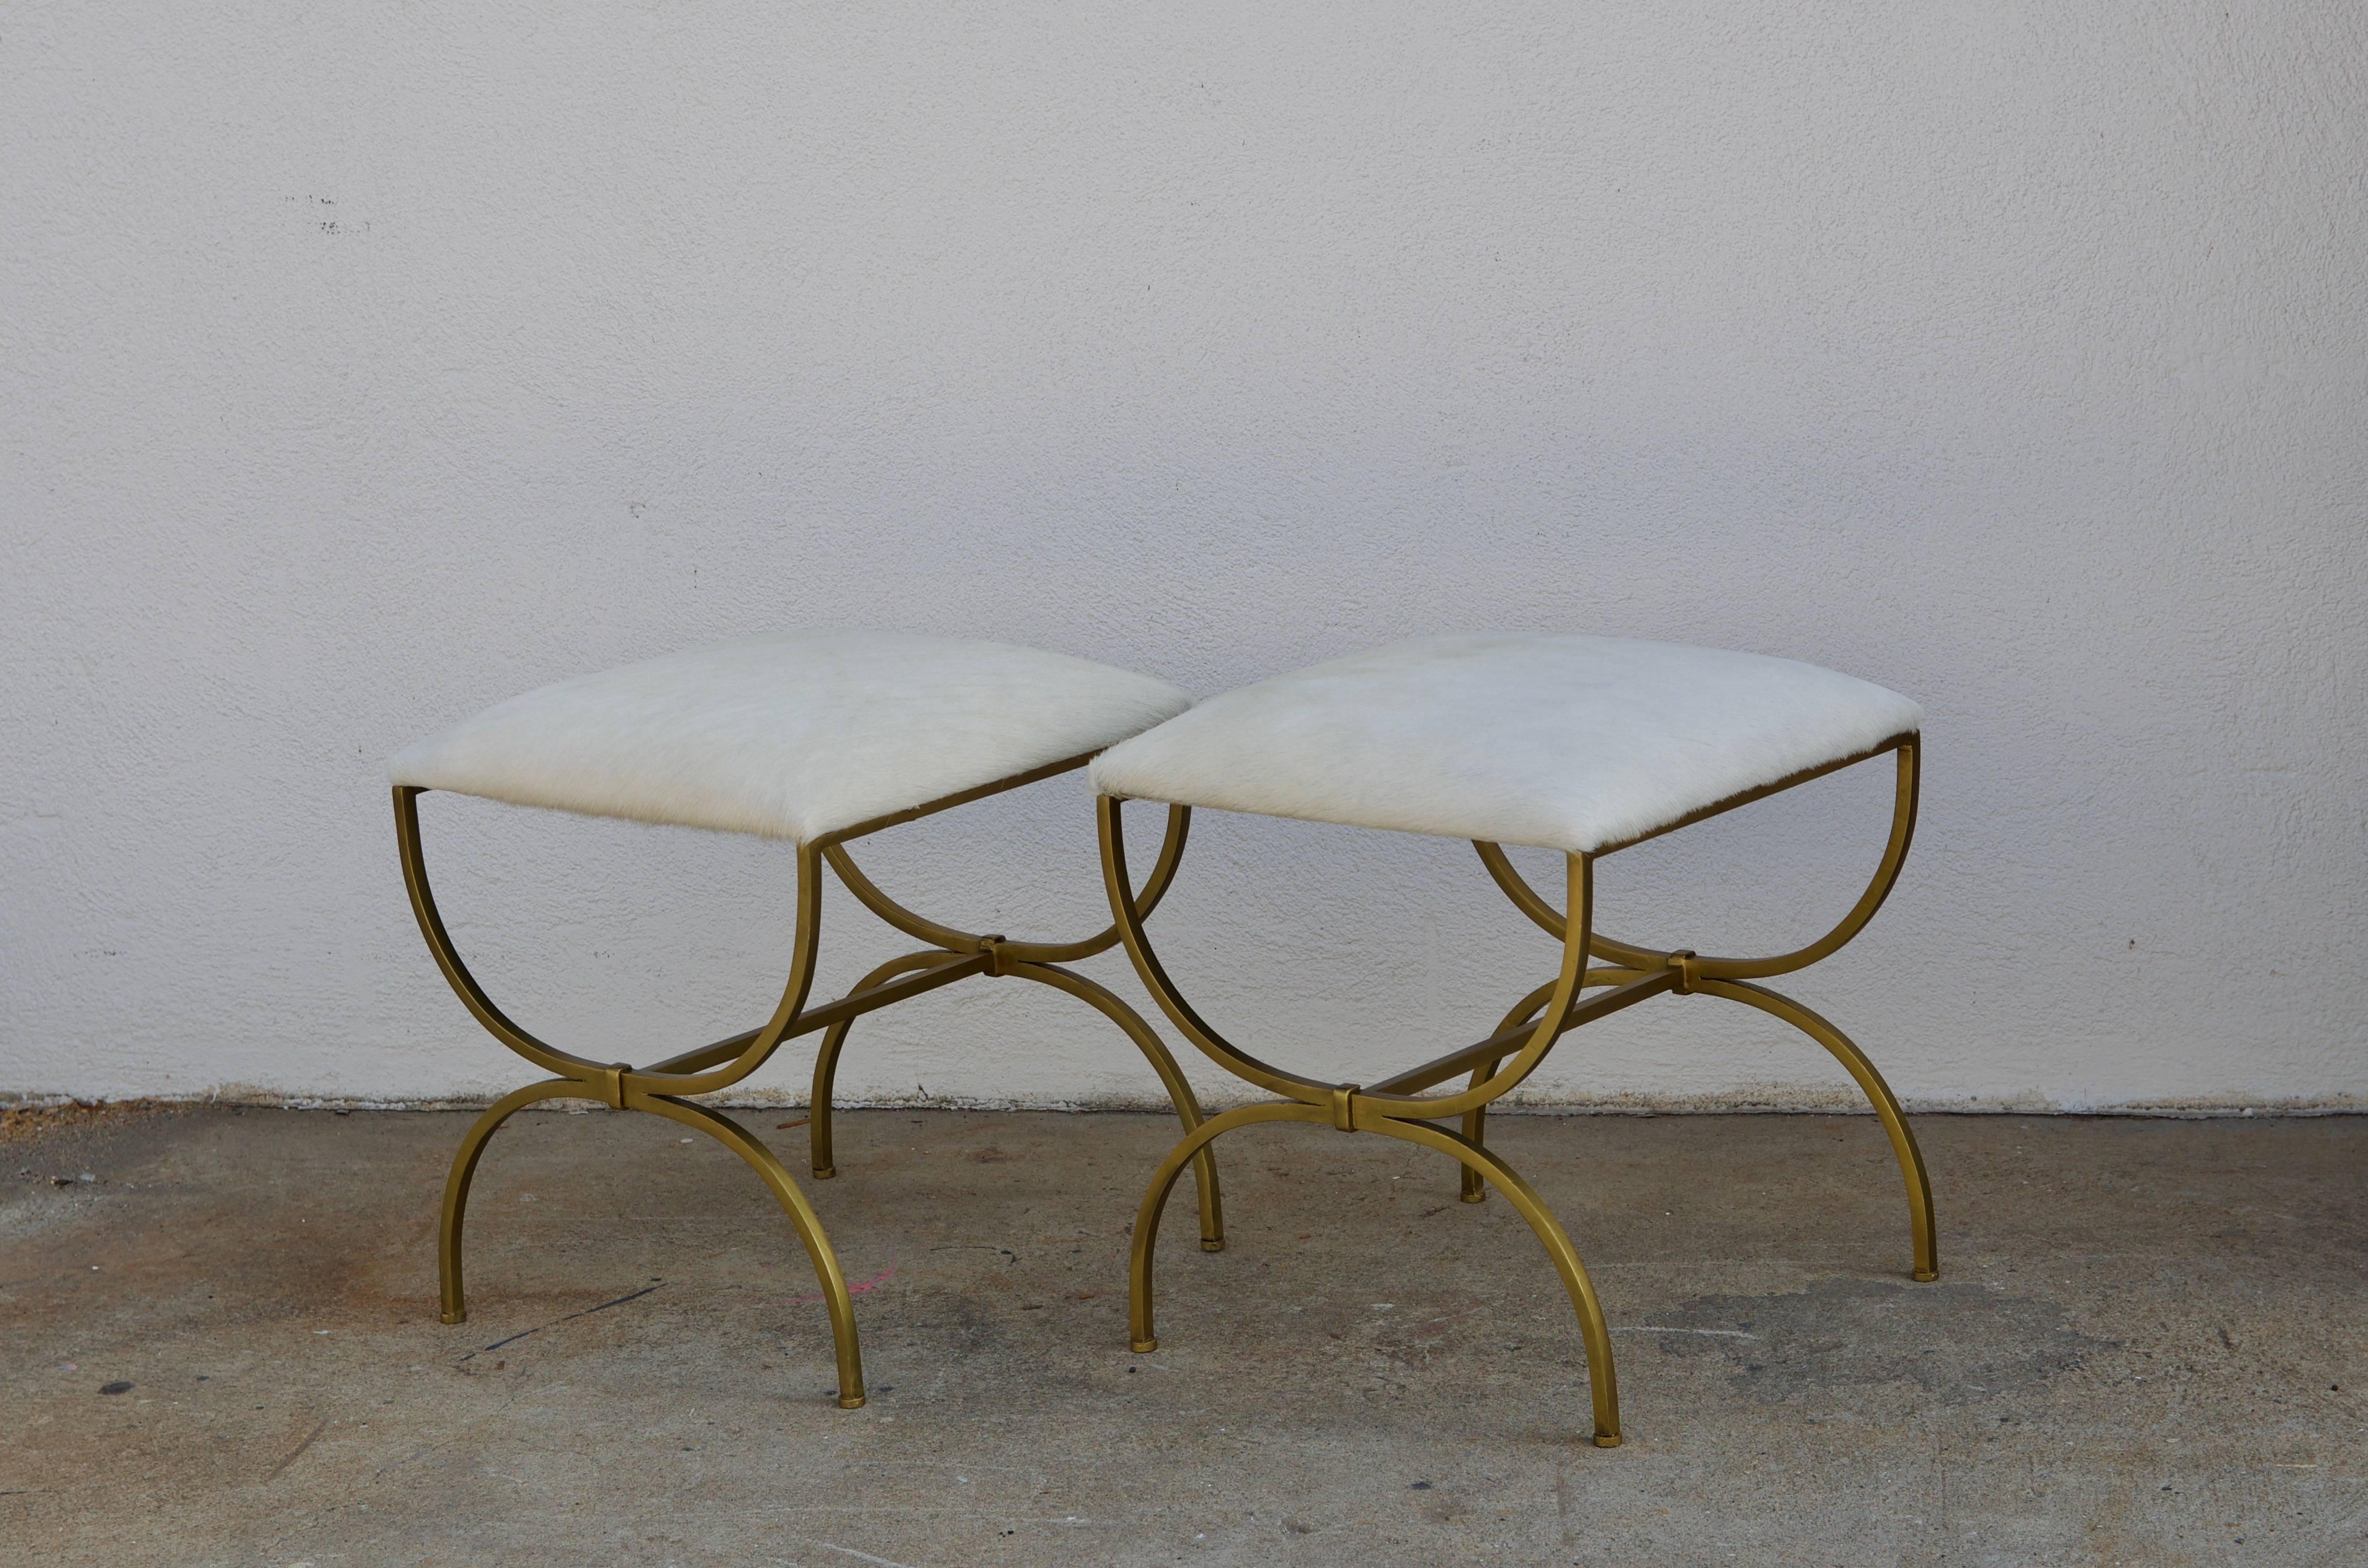 Pair of 'Strapontin' gilt wrought iron and hide stools by Design Frères, in the style of Gilbert Poillerat.